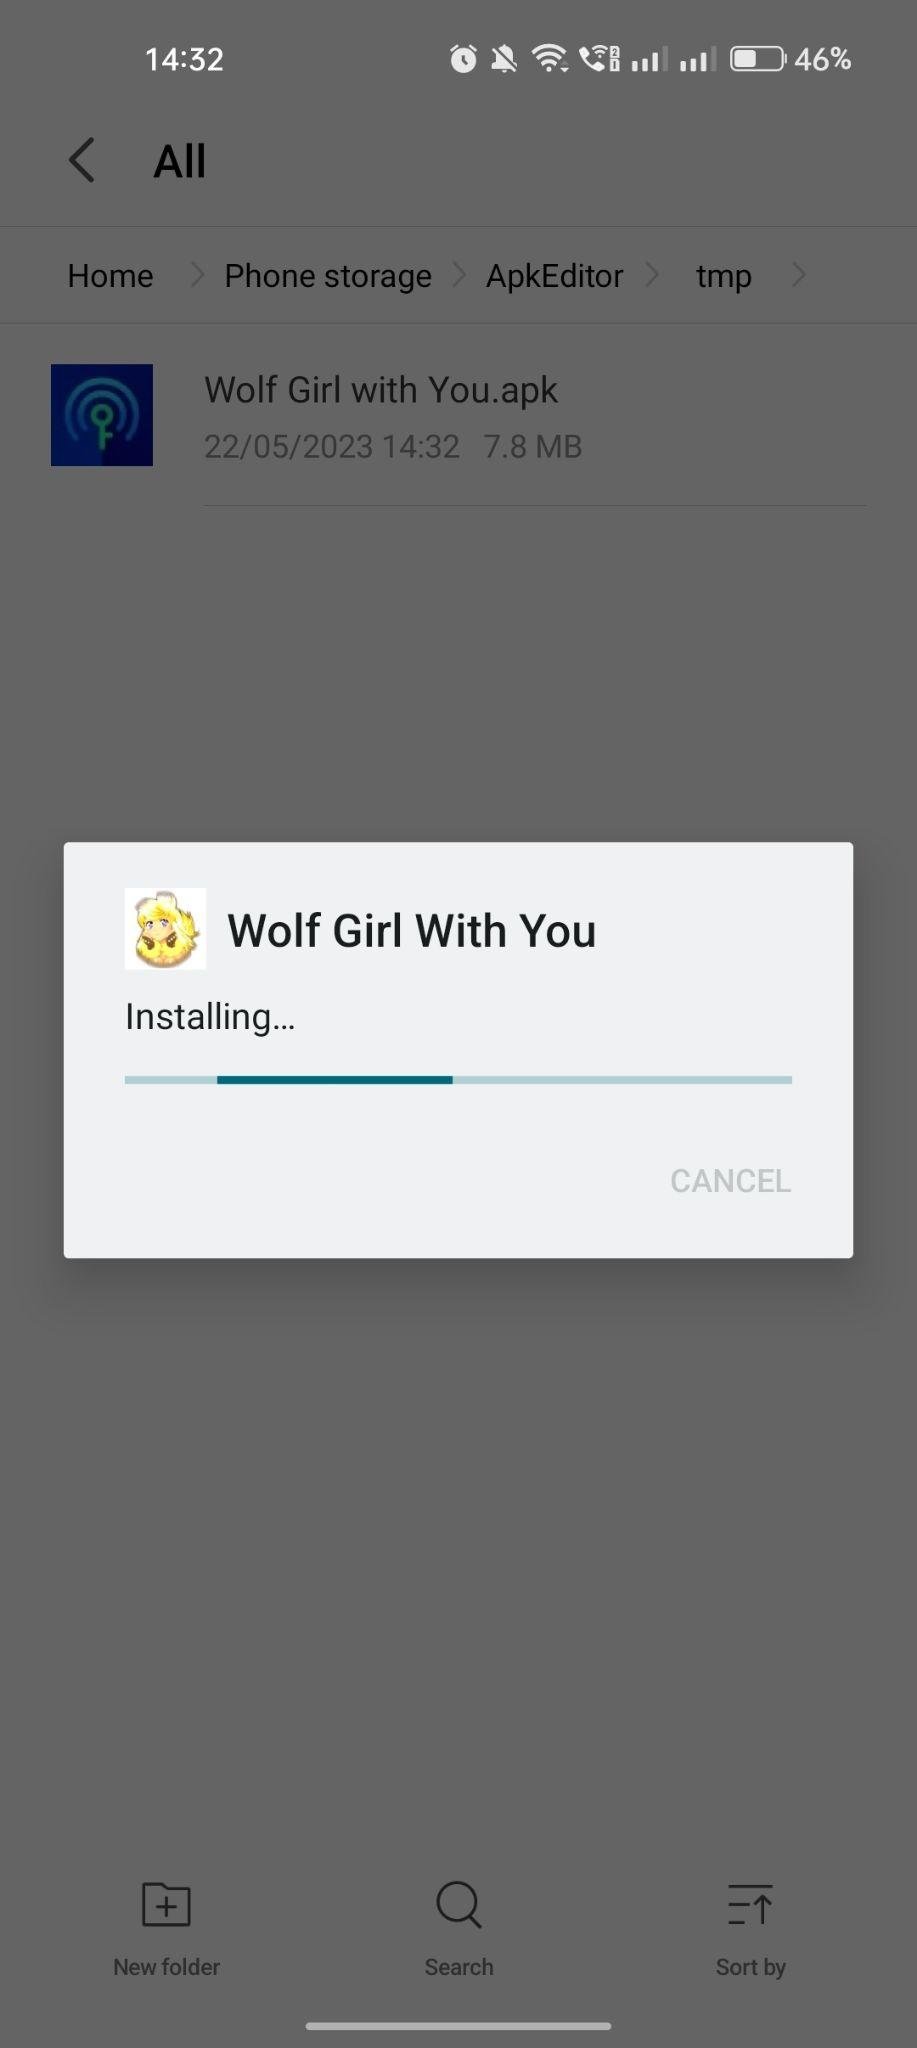 Wolf Girl With You apk installing